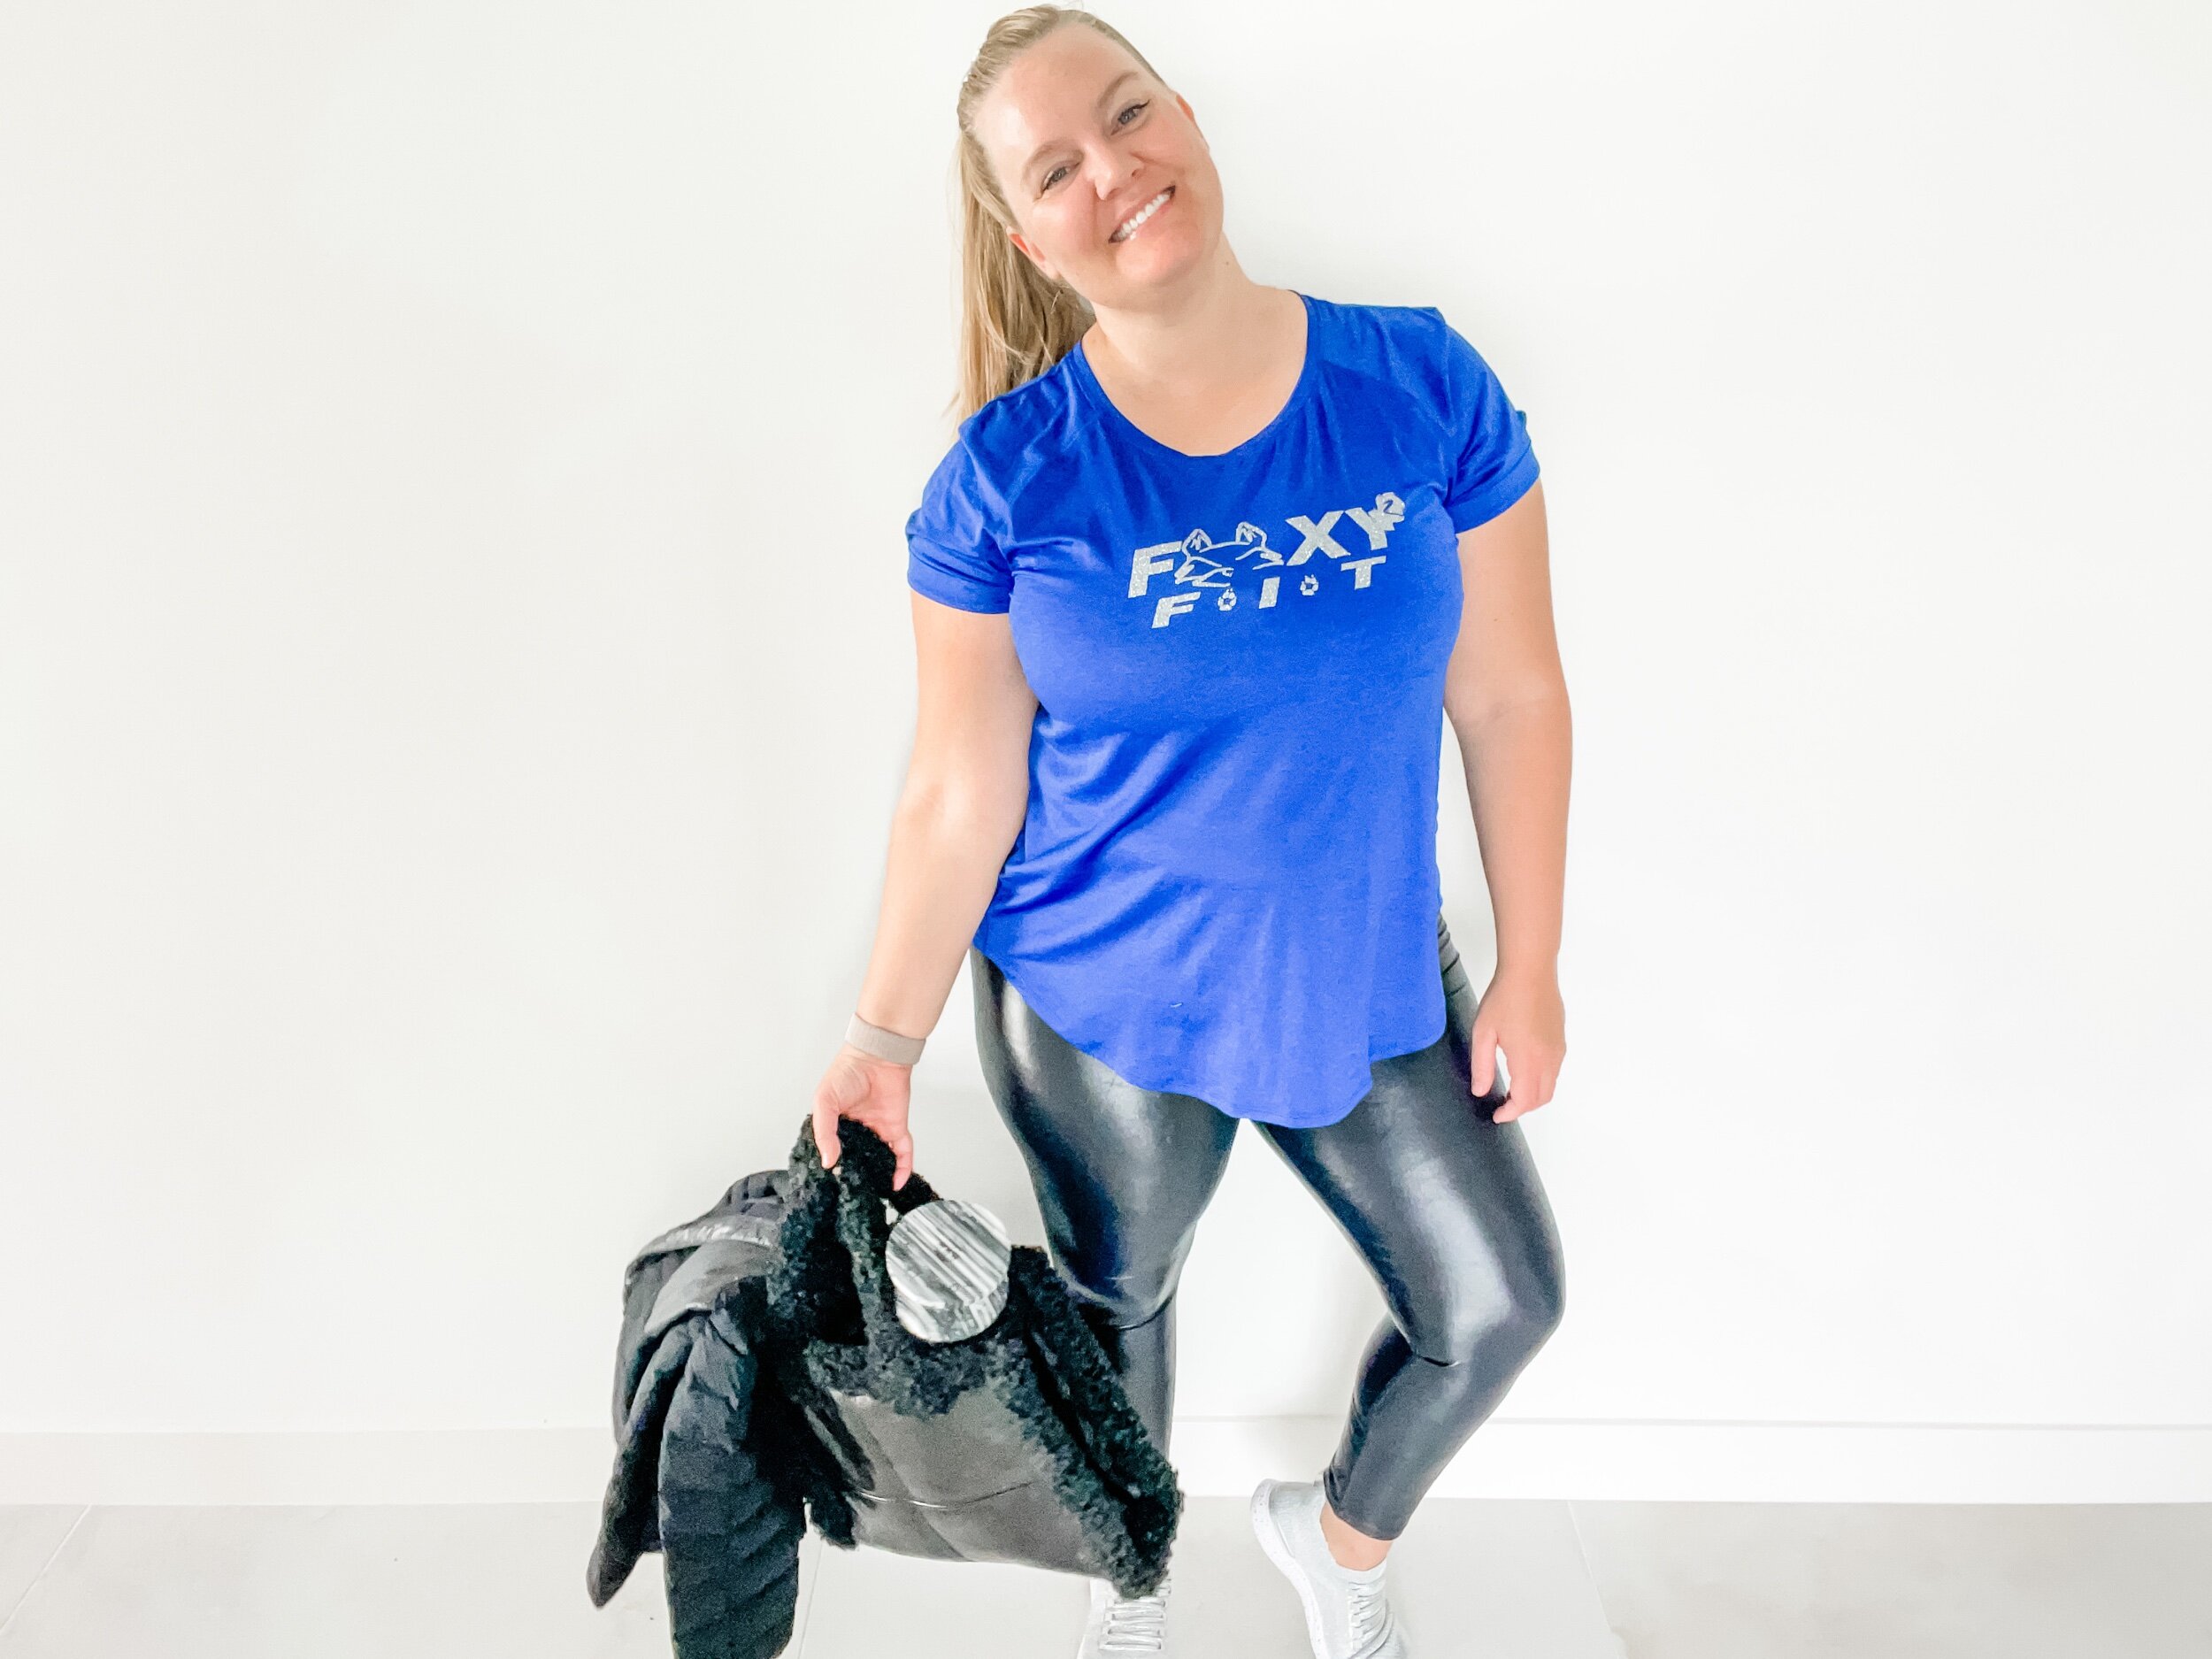 lemon loves blog giveaway carbon 38 takara shine leggings win free tights —  Be Foxy Fit - improve mobility, relieve tension, reduce stress through  mindful movement